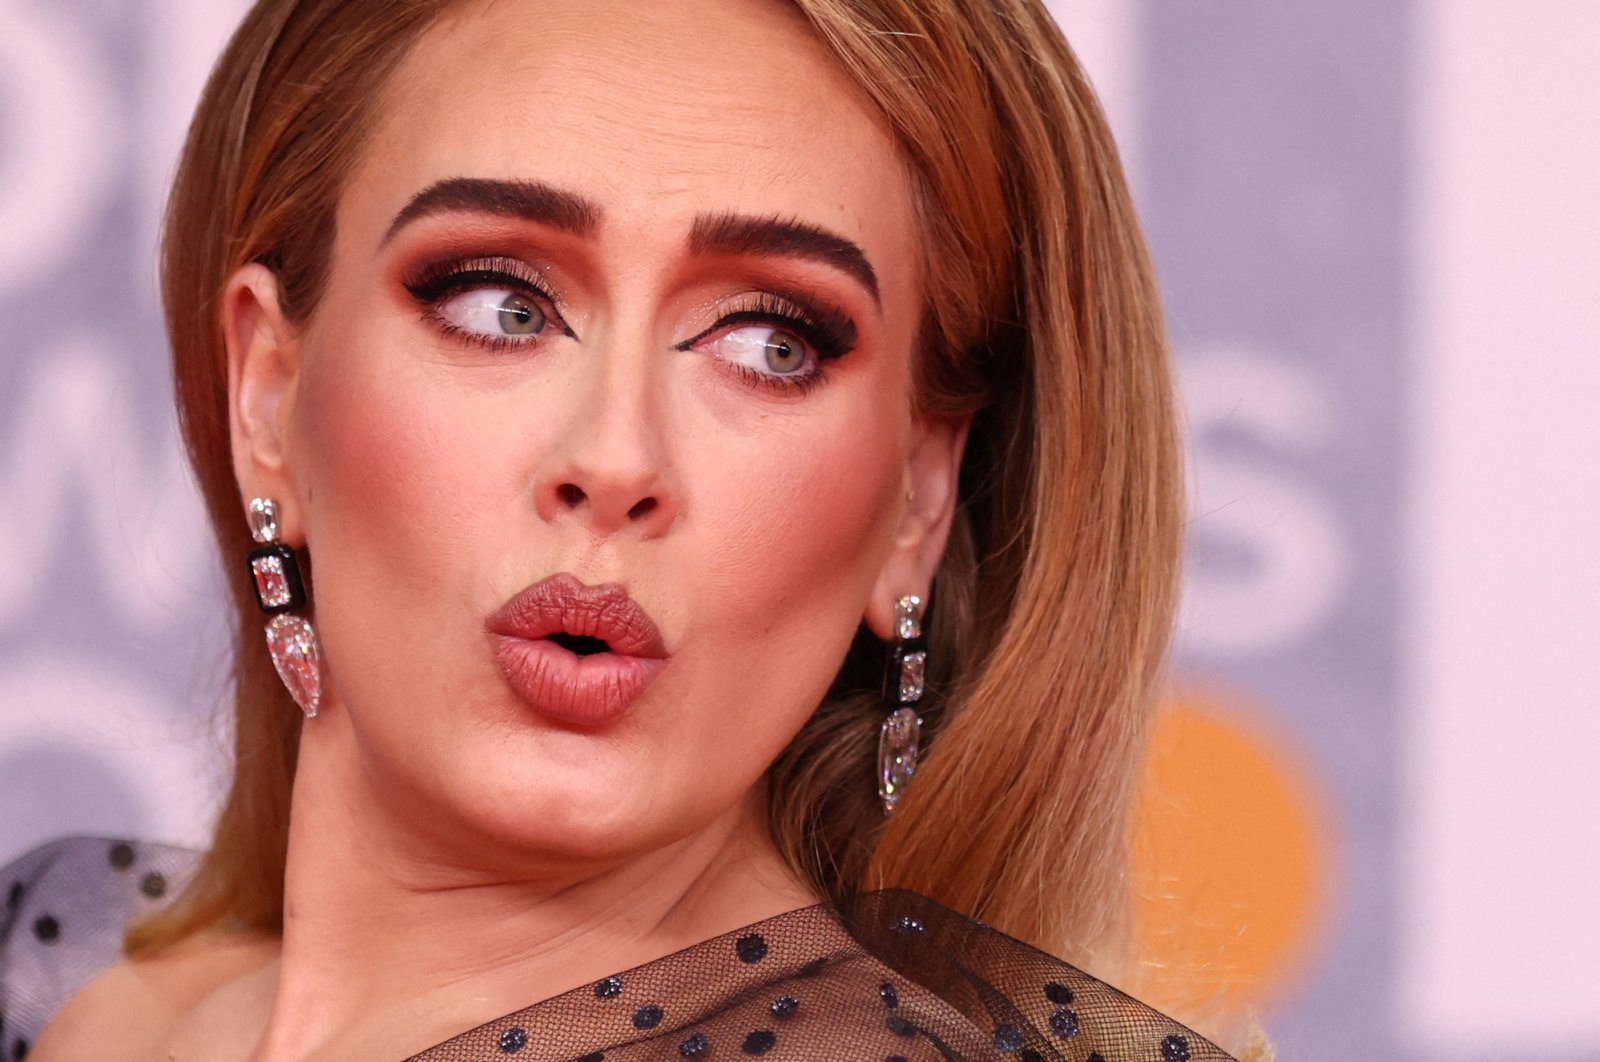 Adele poses as she arrives for the Brit Awards, London, Britain, Feb. 8, 2022. (Reuters Photo)